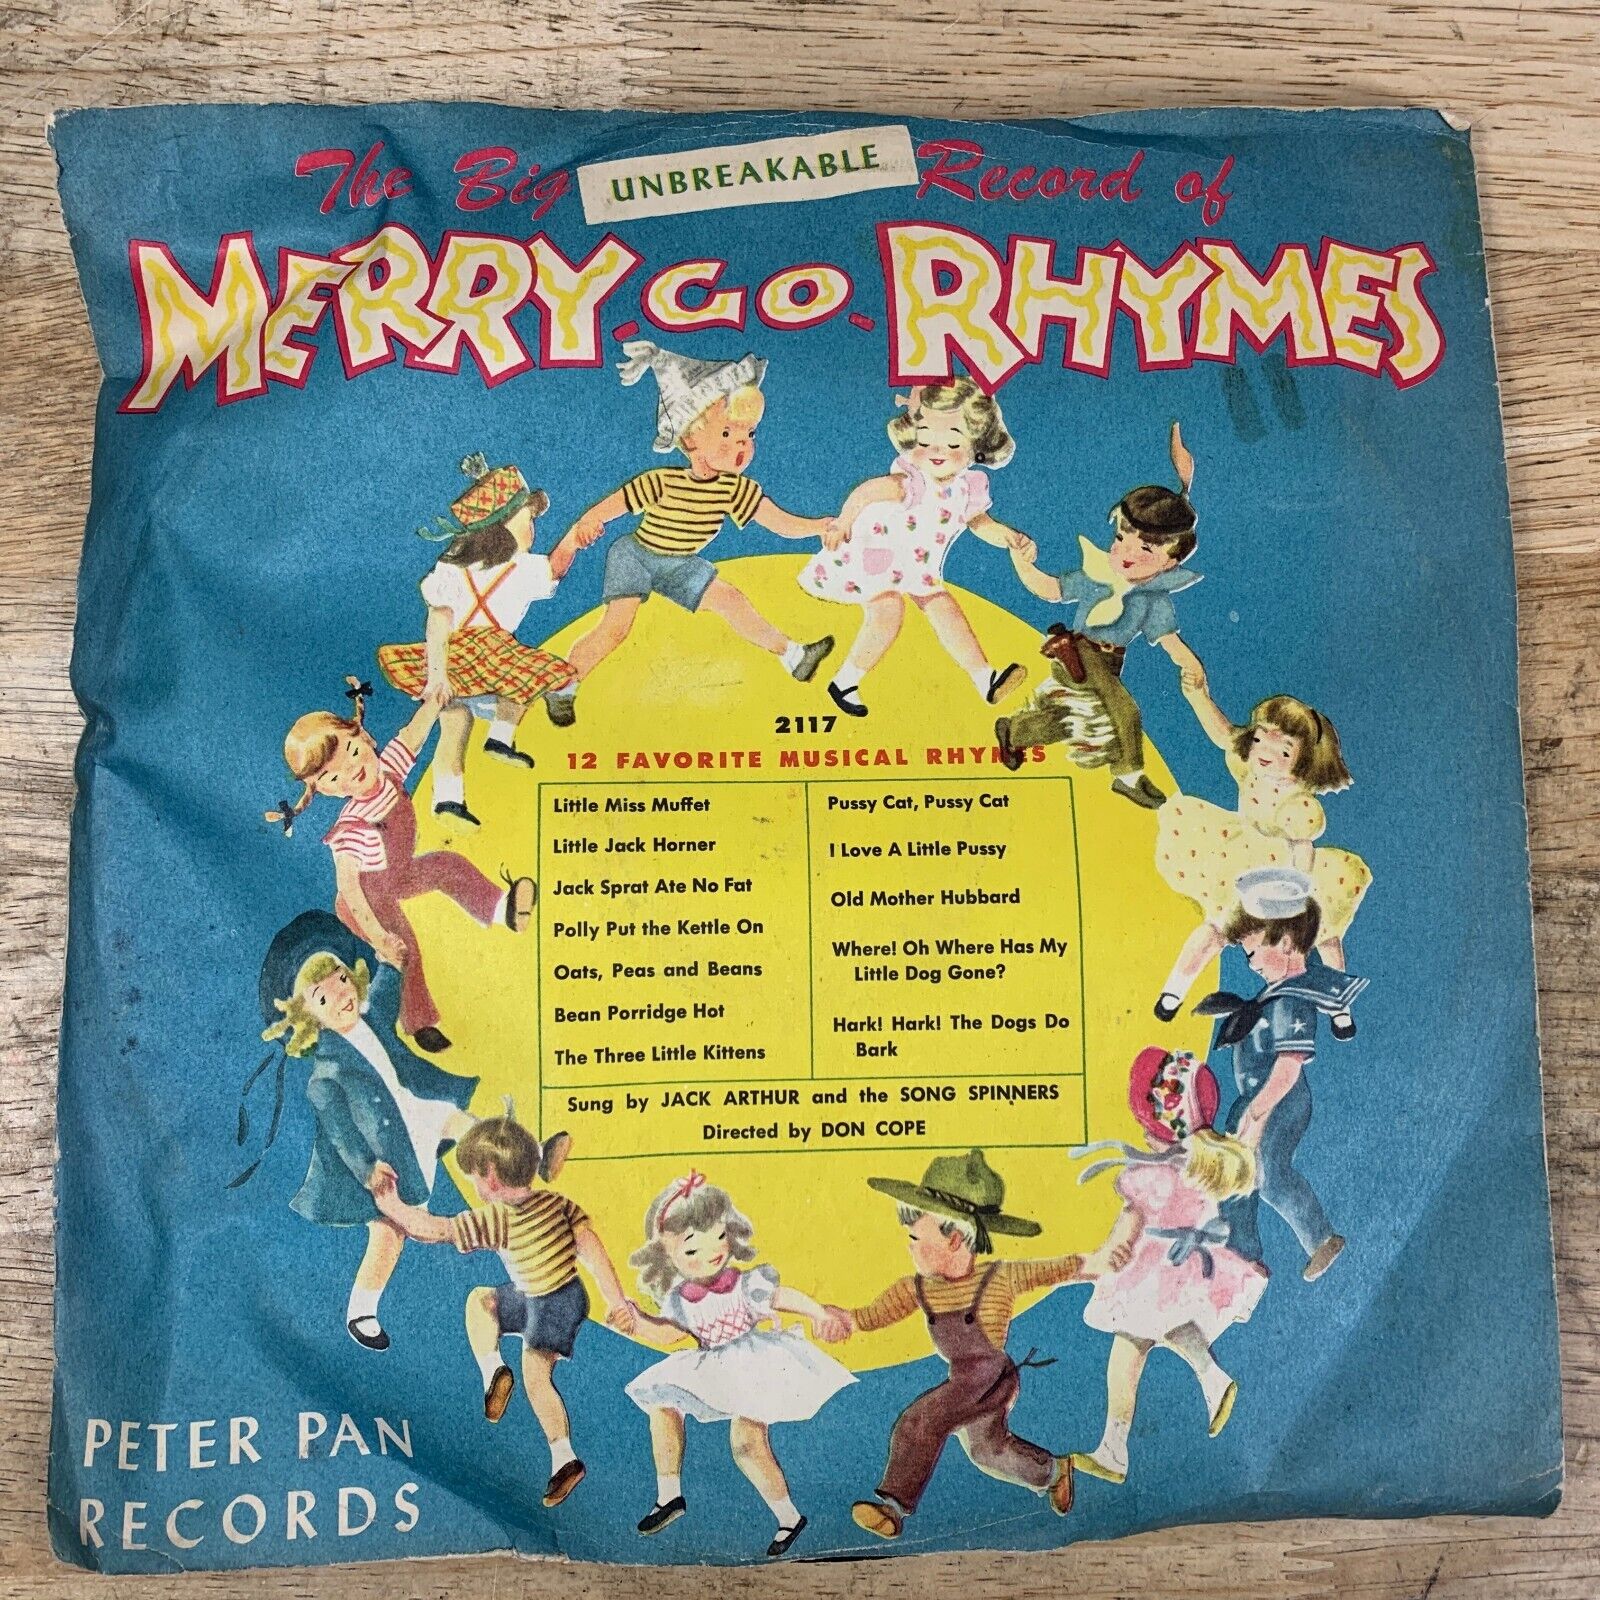 Vtg Merry Go Rhymes Jack Arthur Song Spinners 78 rpm 1949 Peter Pan Records 2117